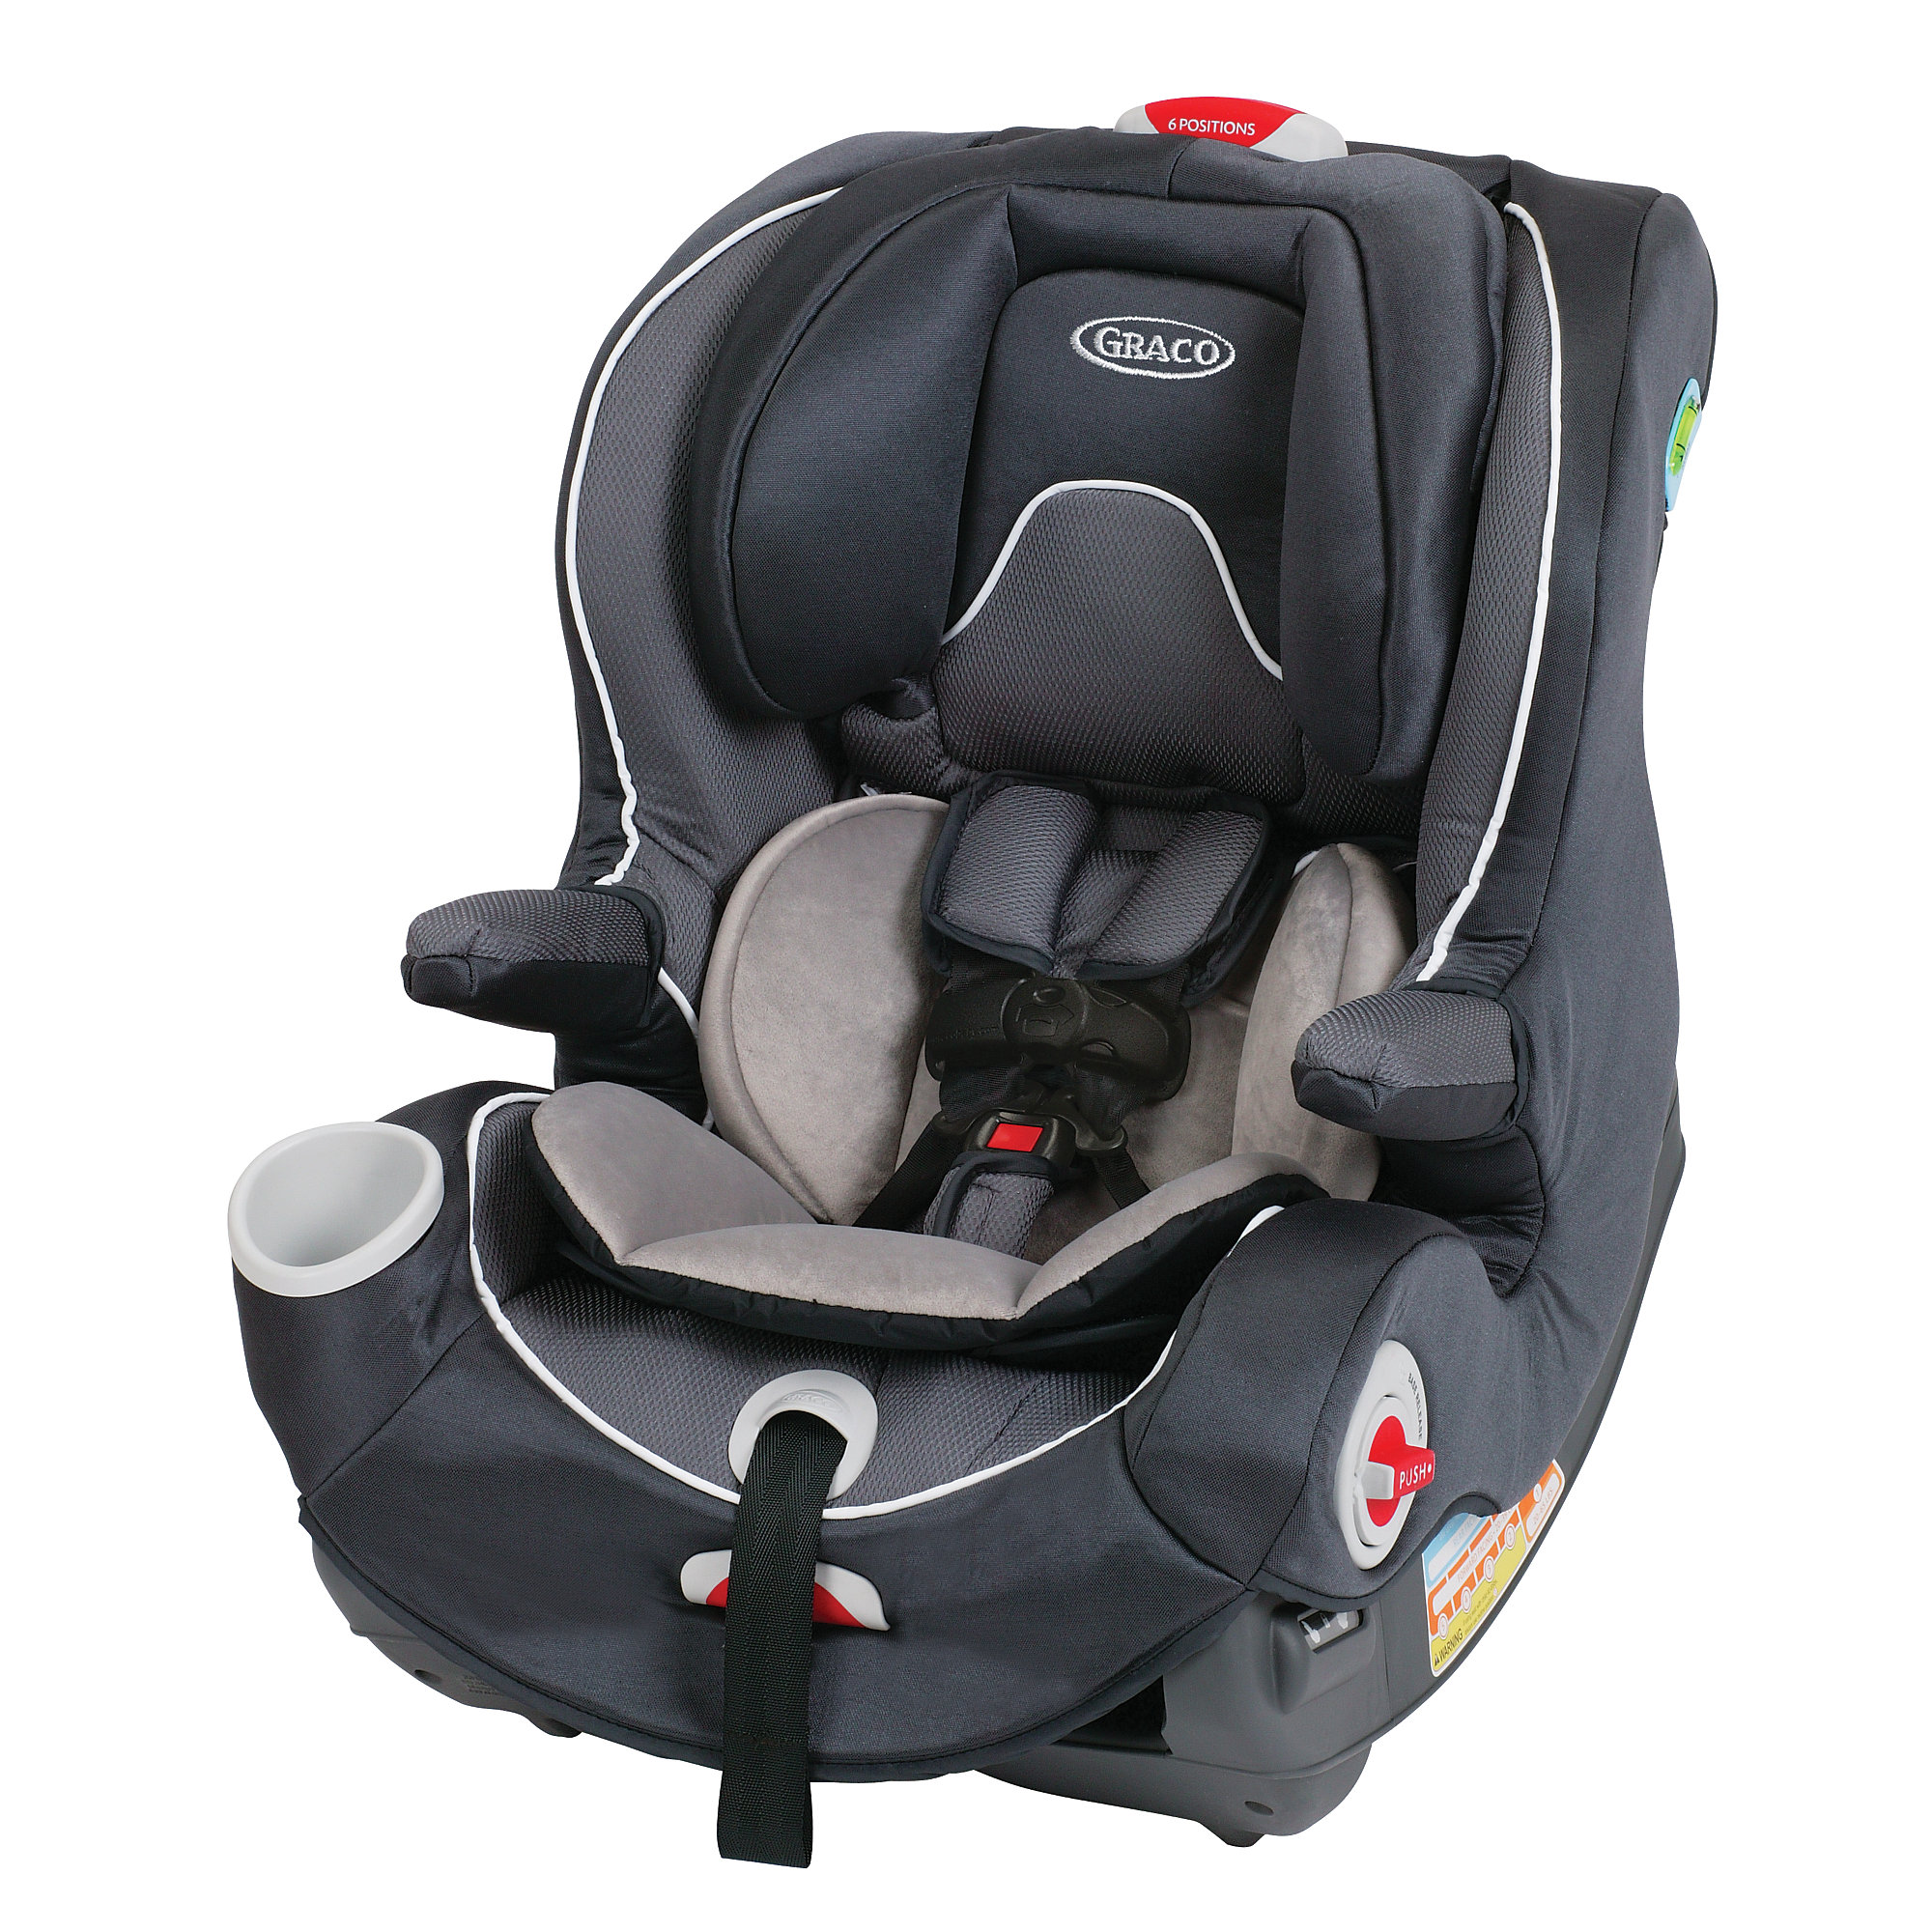 Graco Smart Seat All in One Car Seat